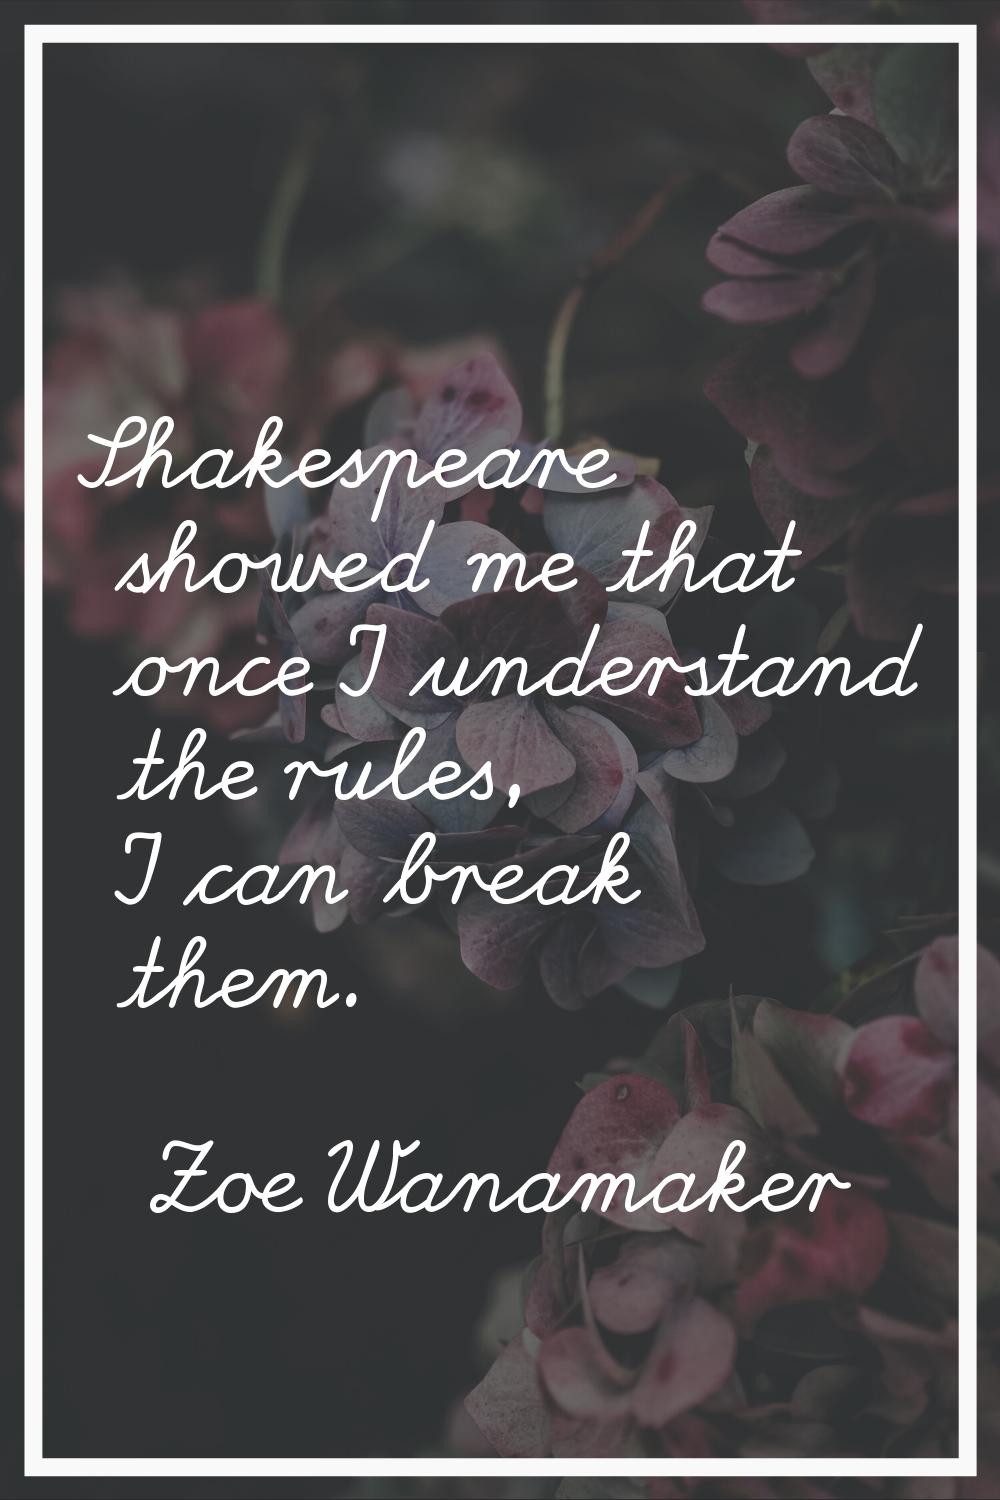 Shakespeare showed me that once I understand the rules, I can break them.